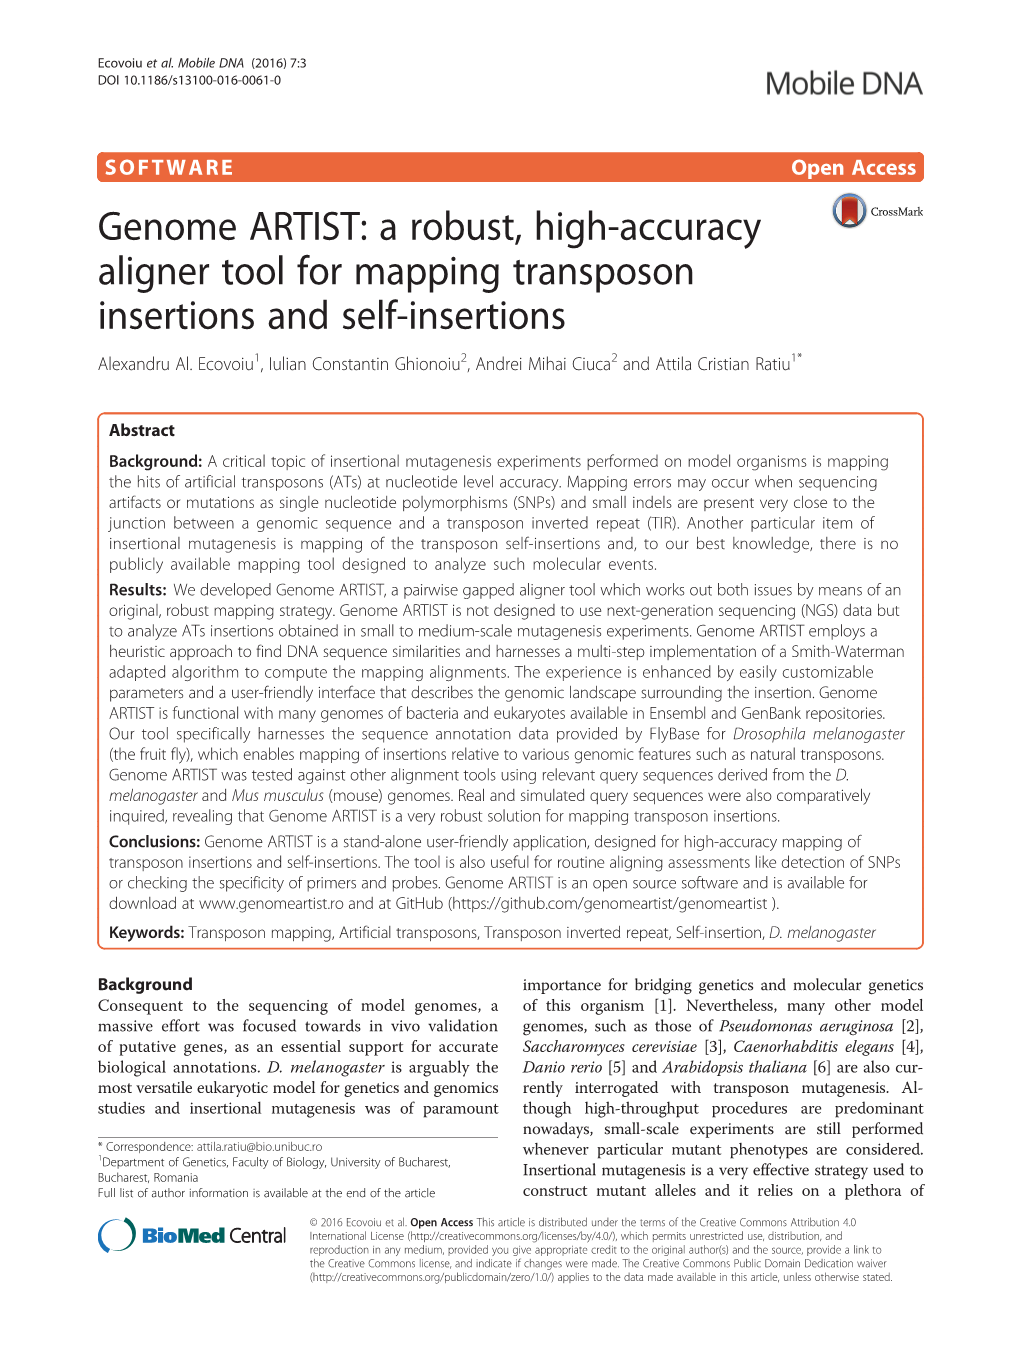 A Robust, High-Accuracy Aligner Tool for Mapping Transposon Insertions and Self-Insertions Alexandru Al